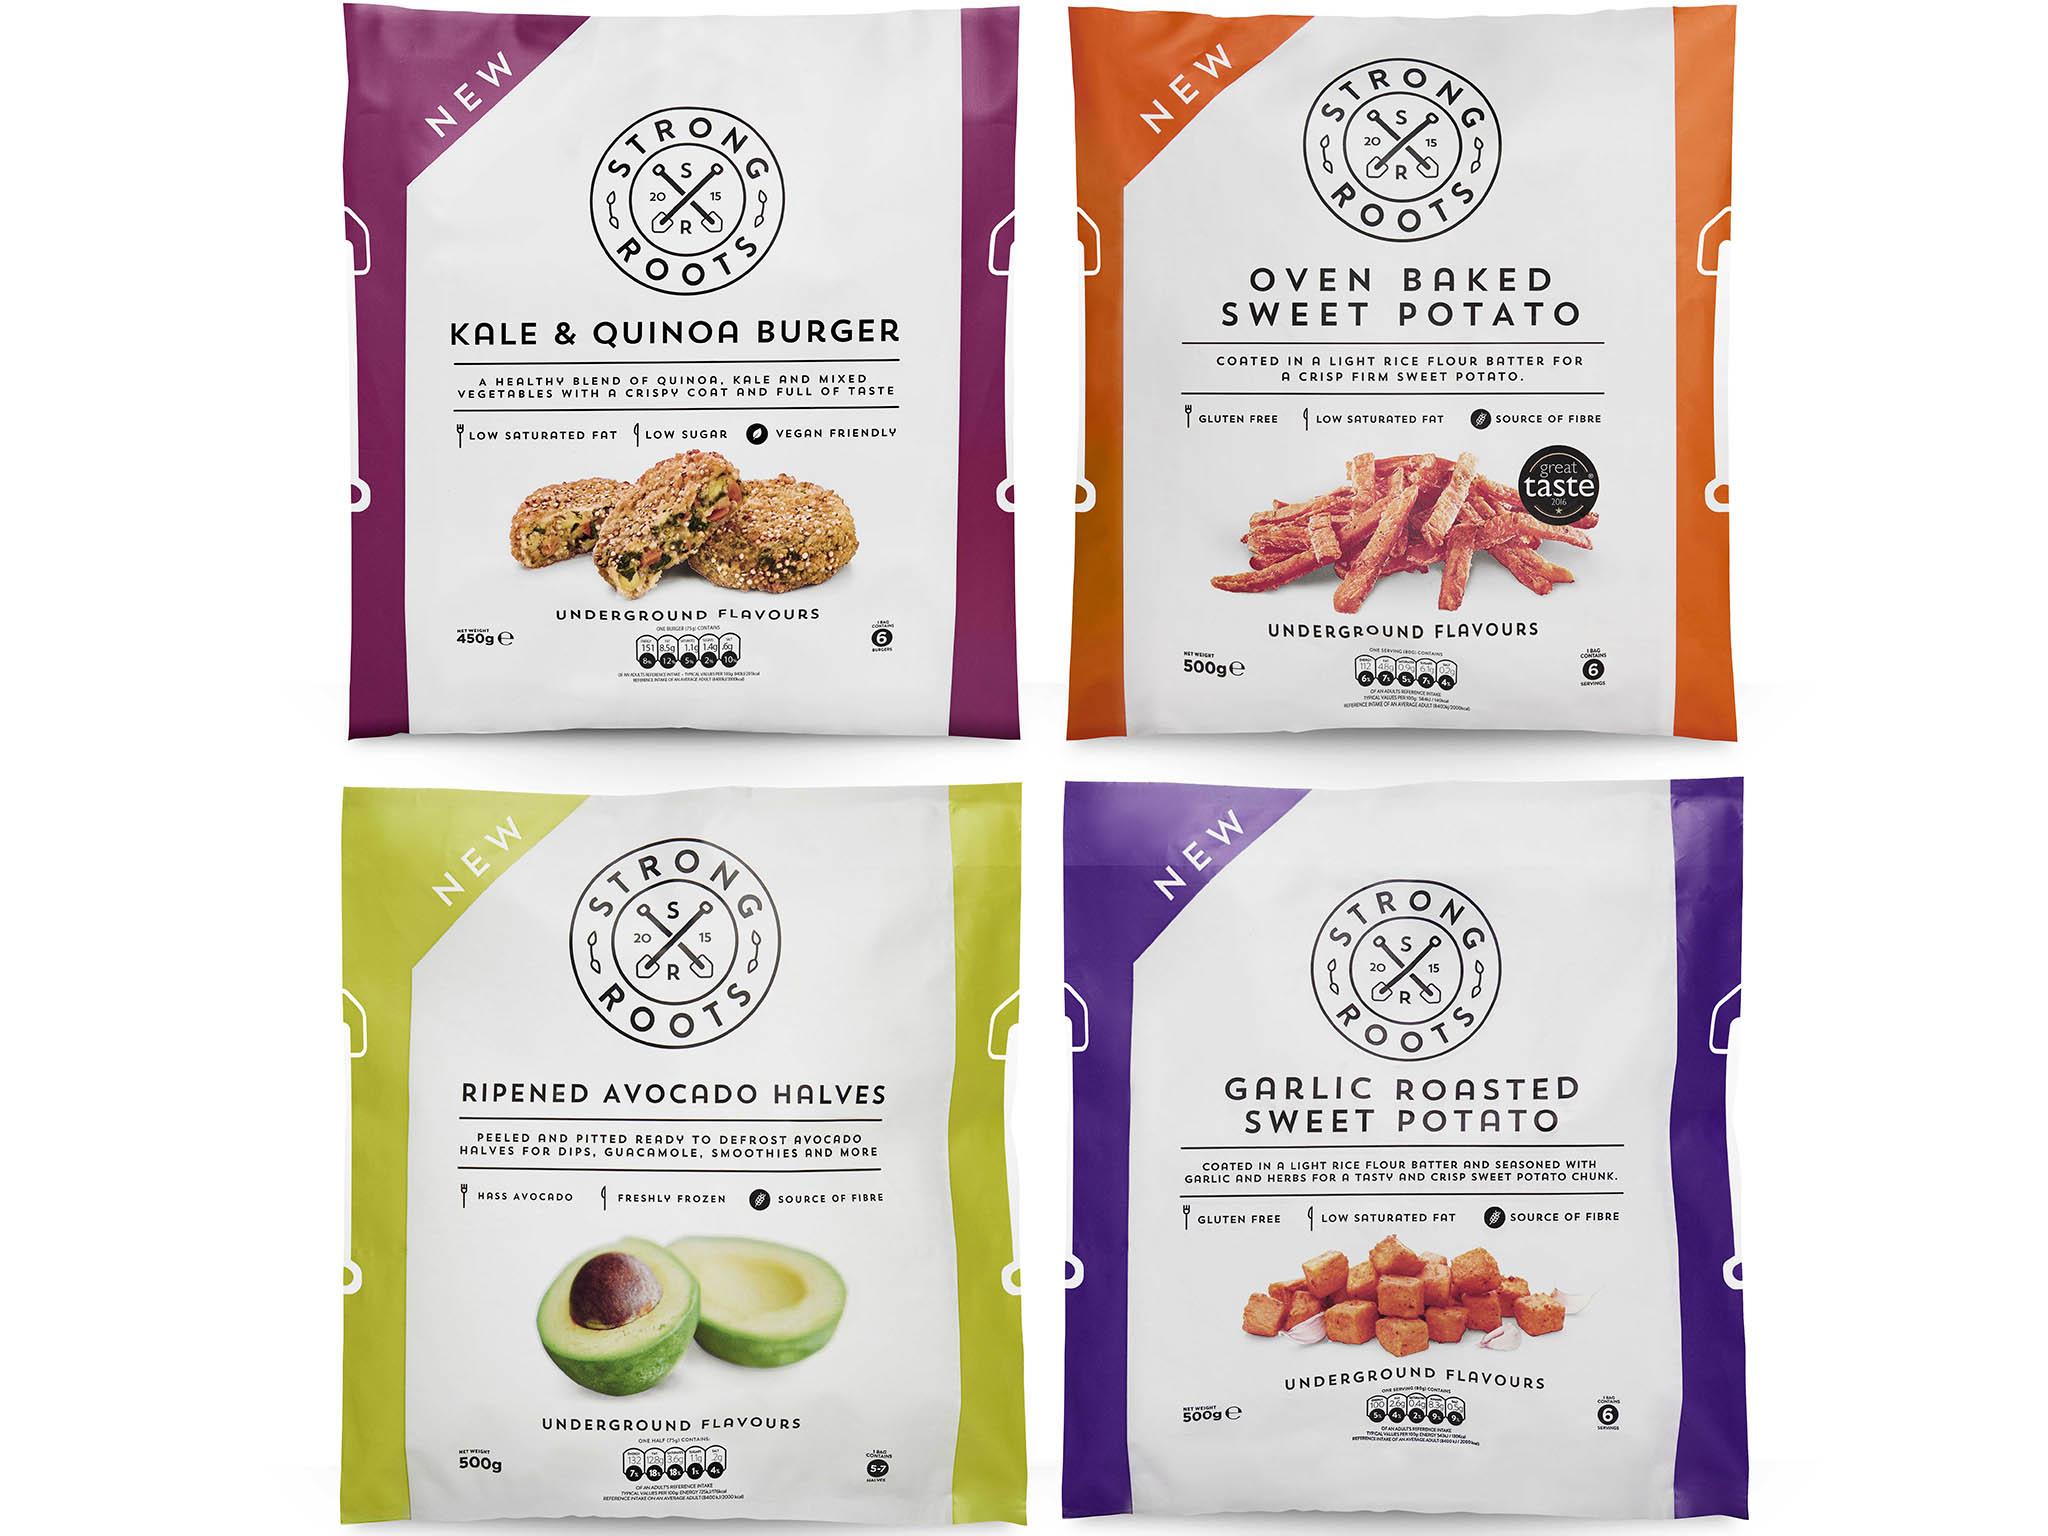 The strong roots range has four new products available at Waitrose and Whole Foods